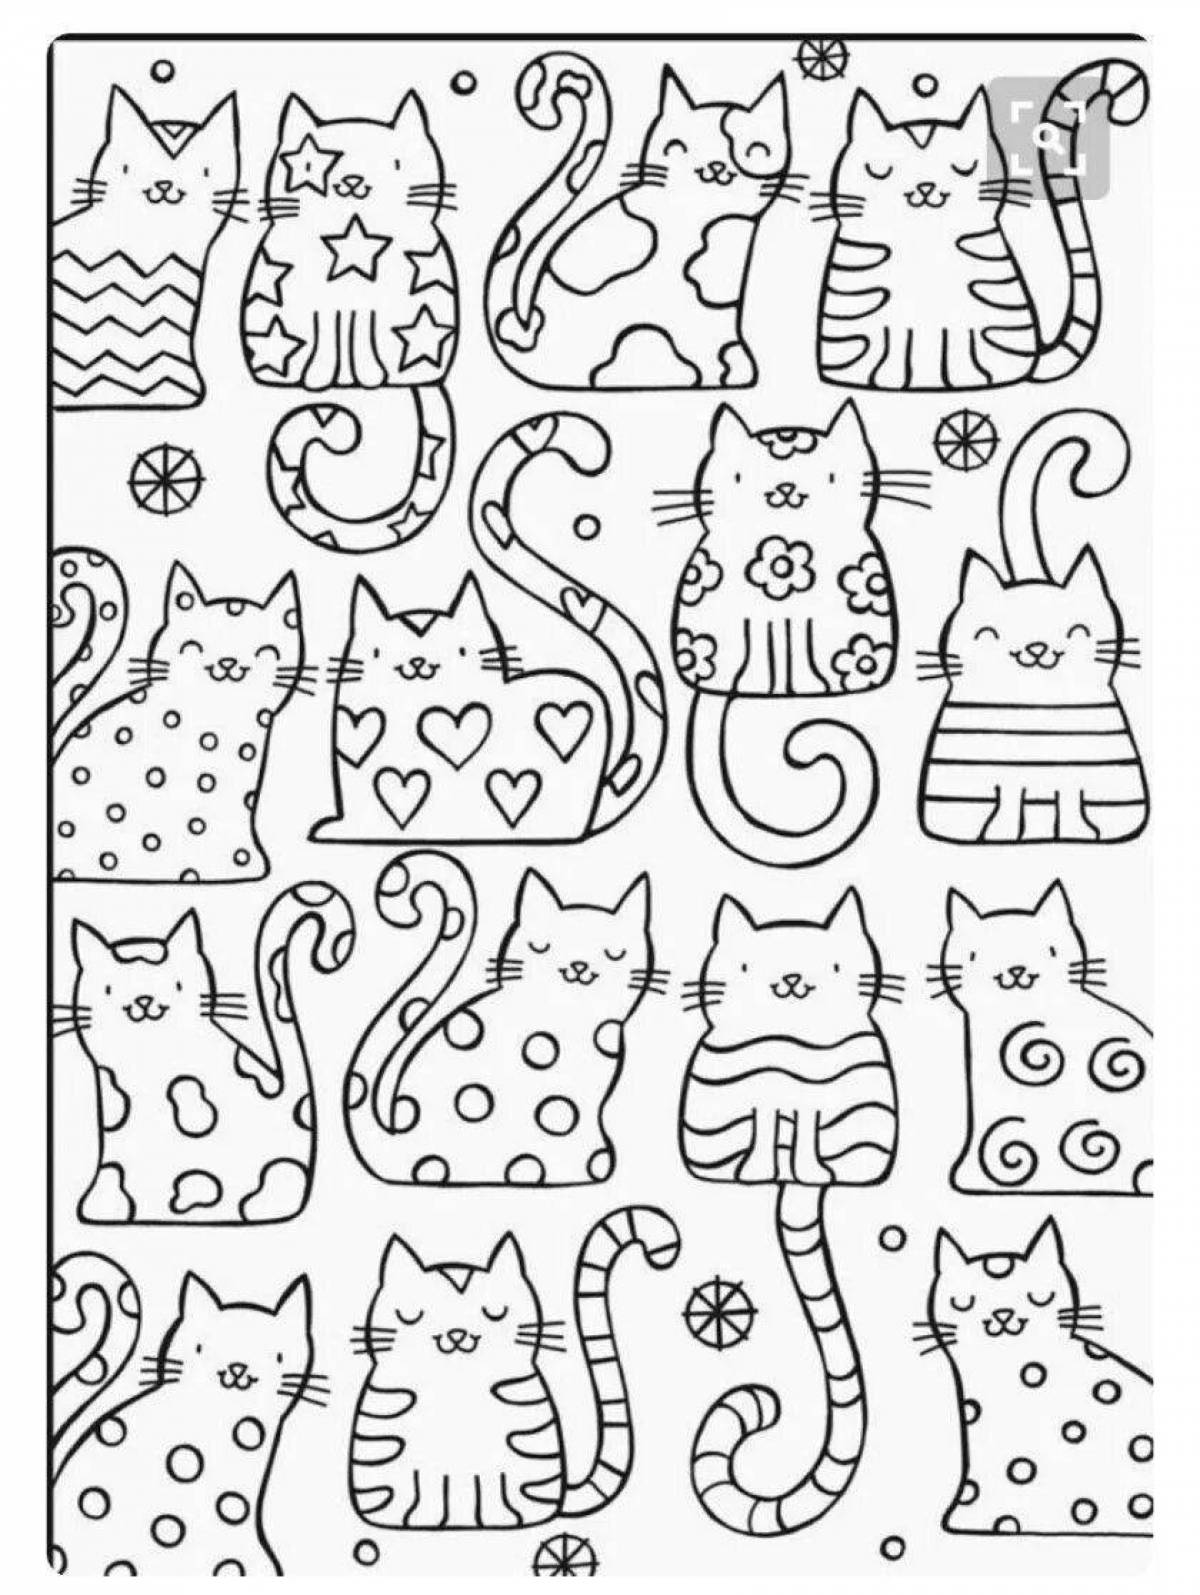 Colouring relaxed cats